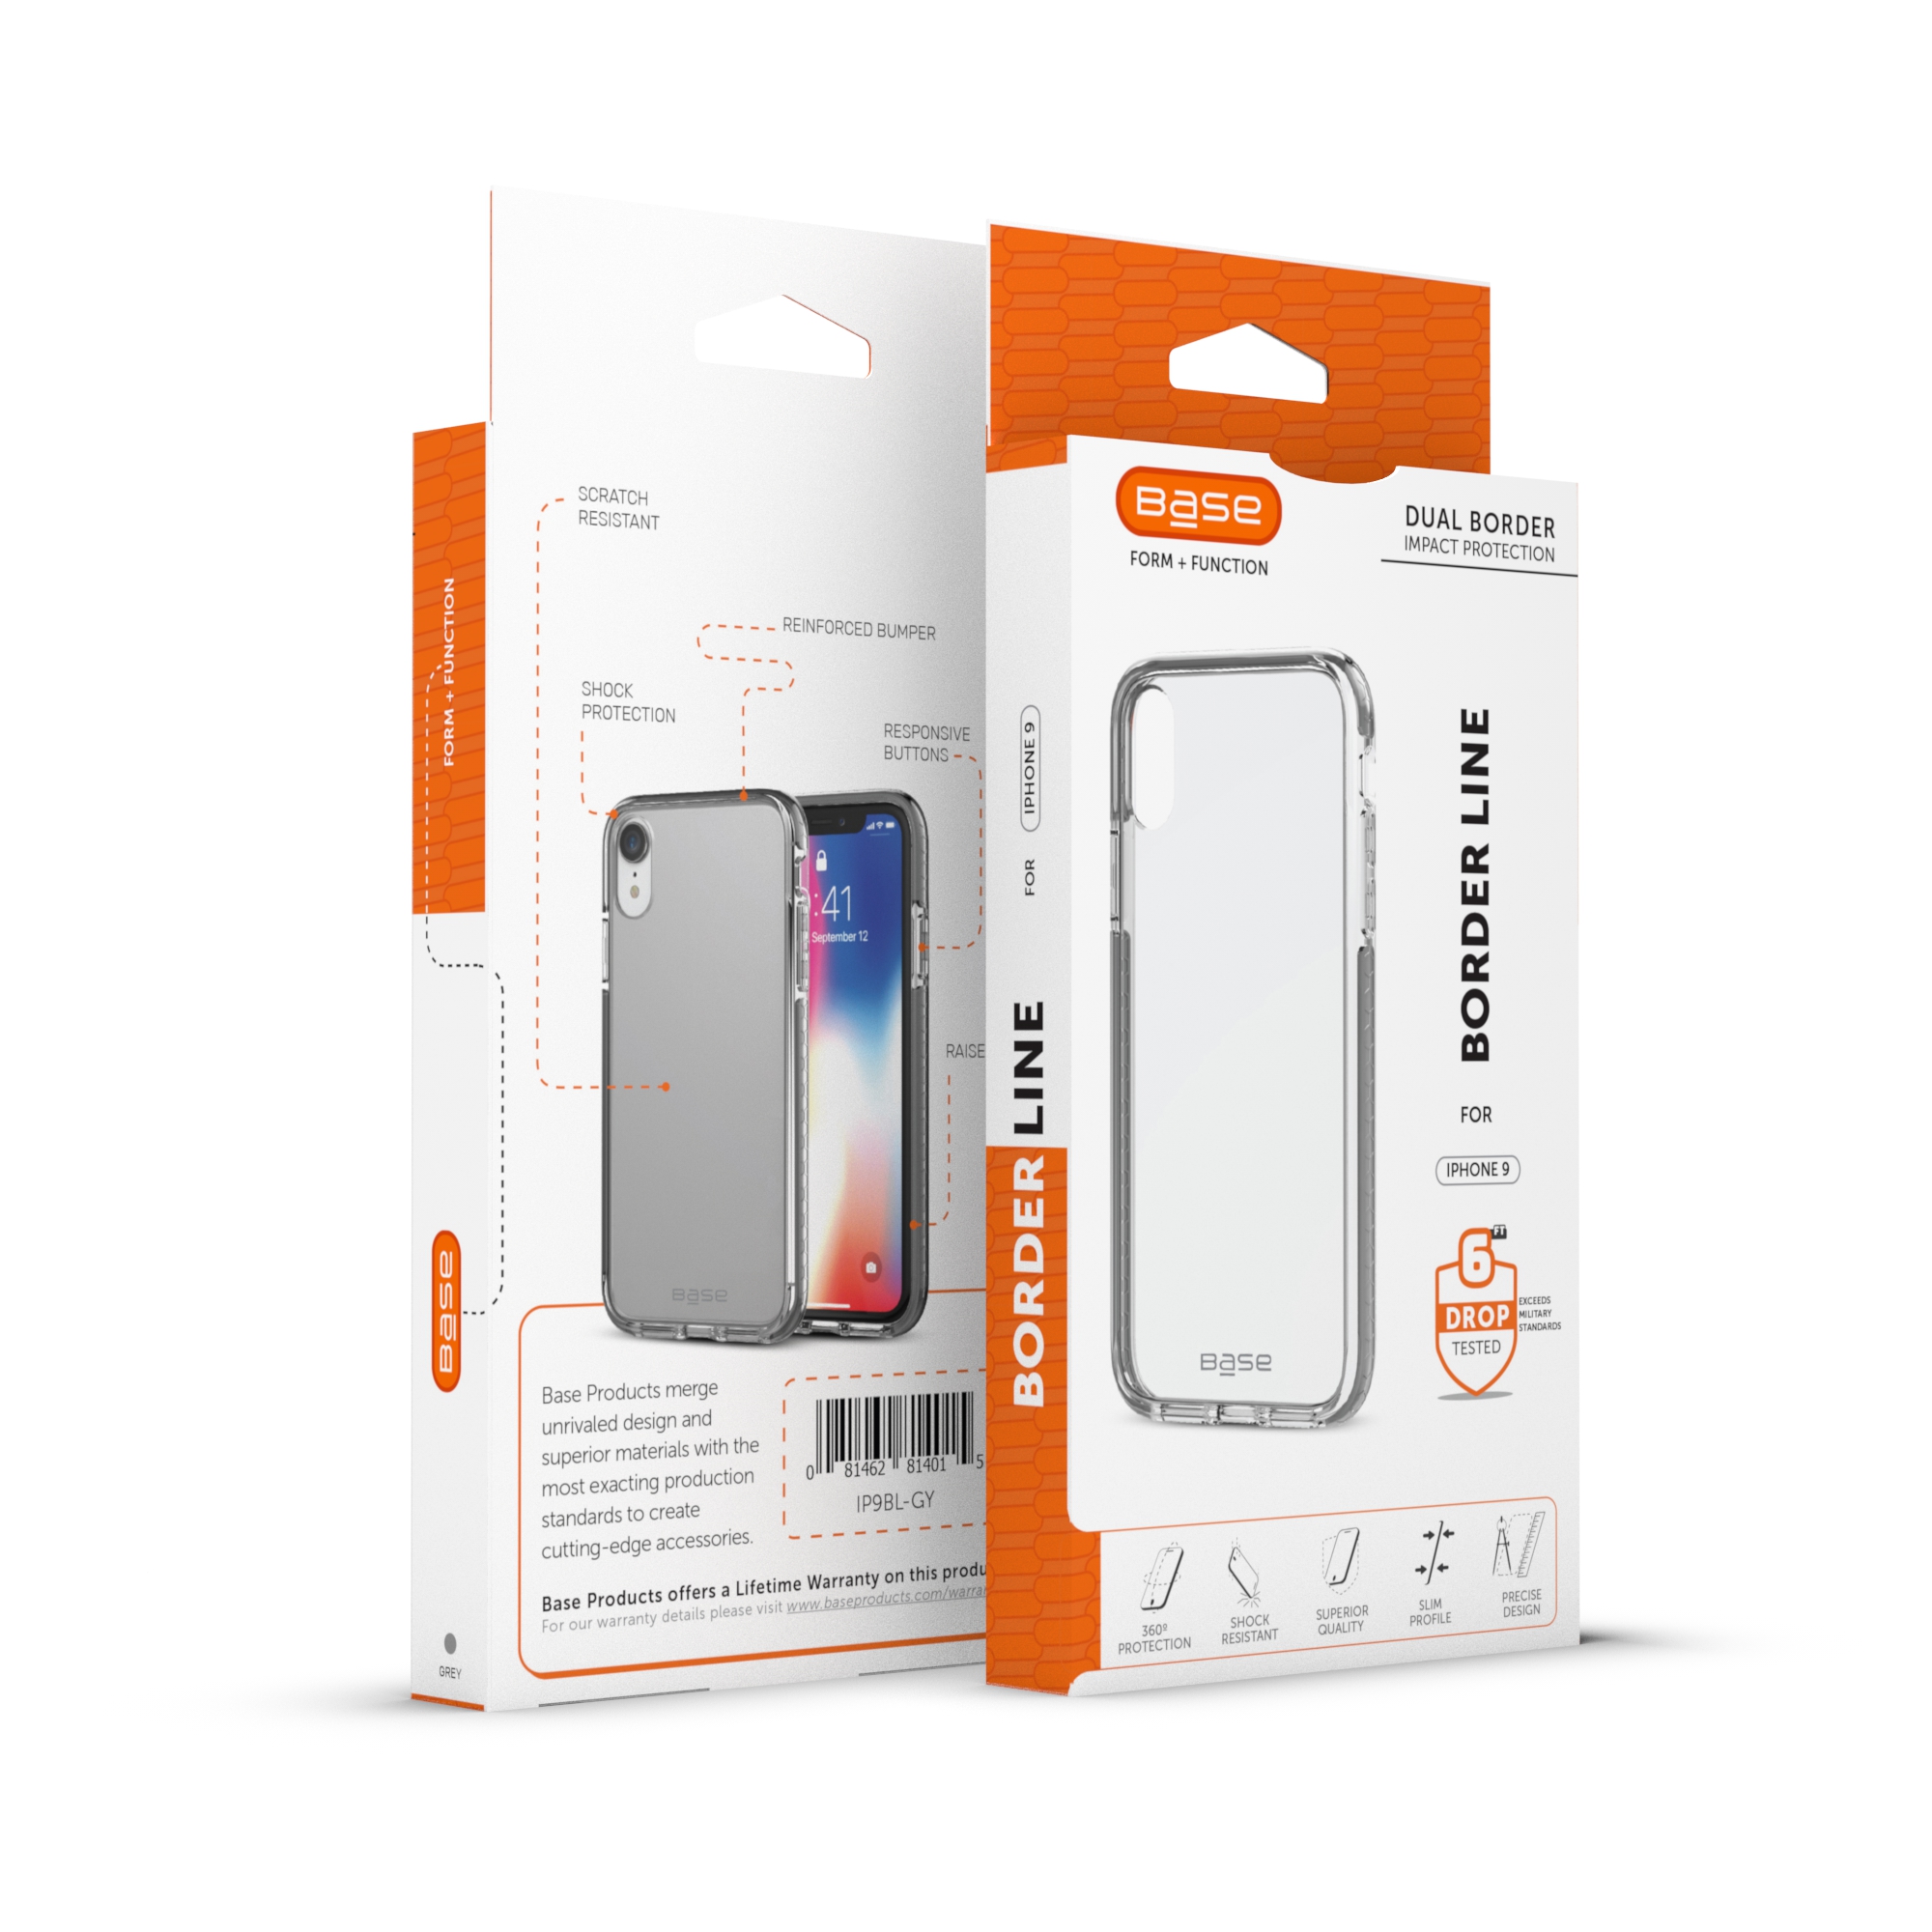 Base BORDERLINE - Dual Border Impact protection For iPhone XR - GREY